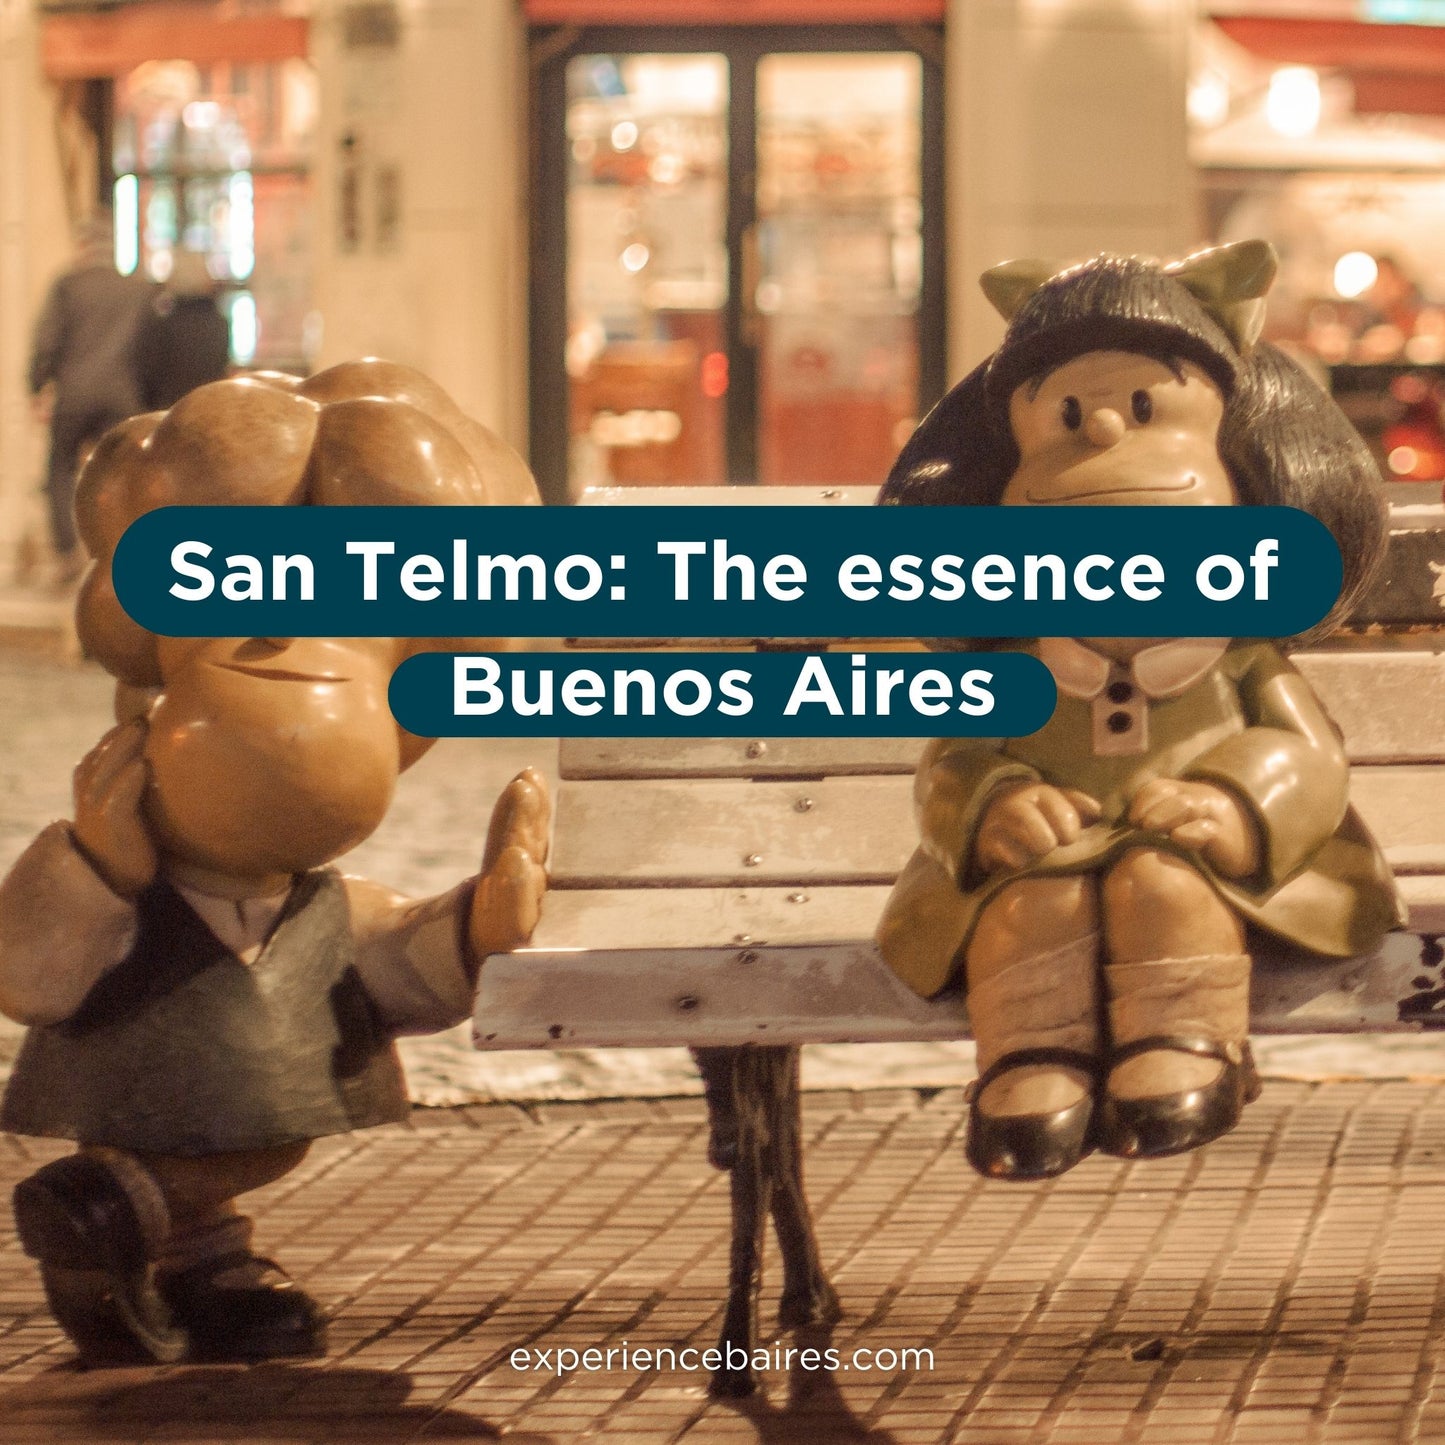 Experience San Telmo, the essence of Buenos Aires